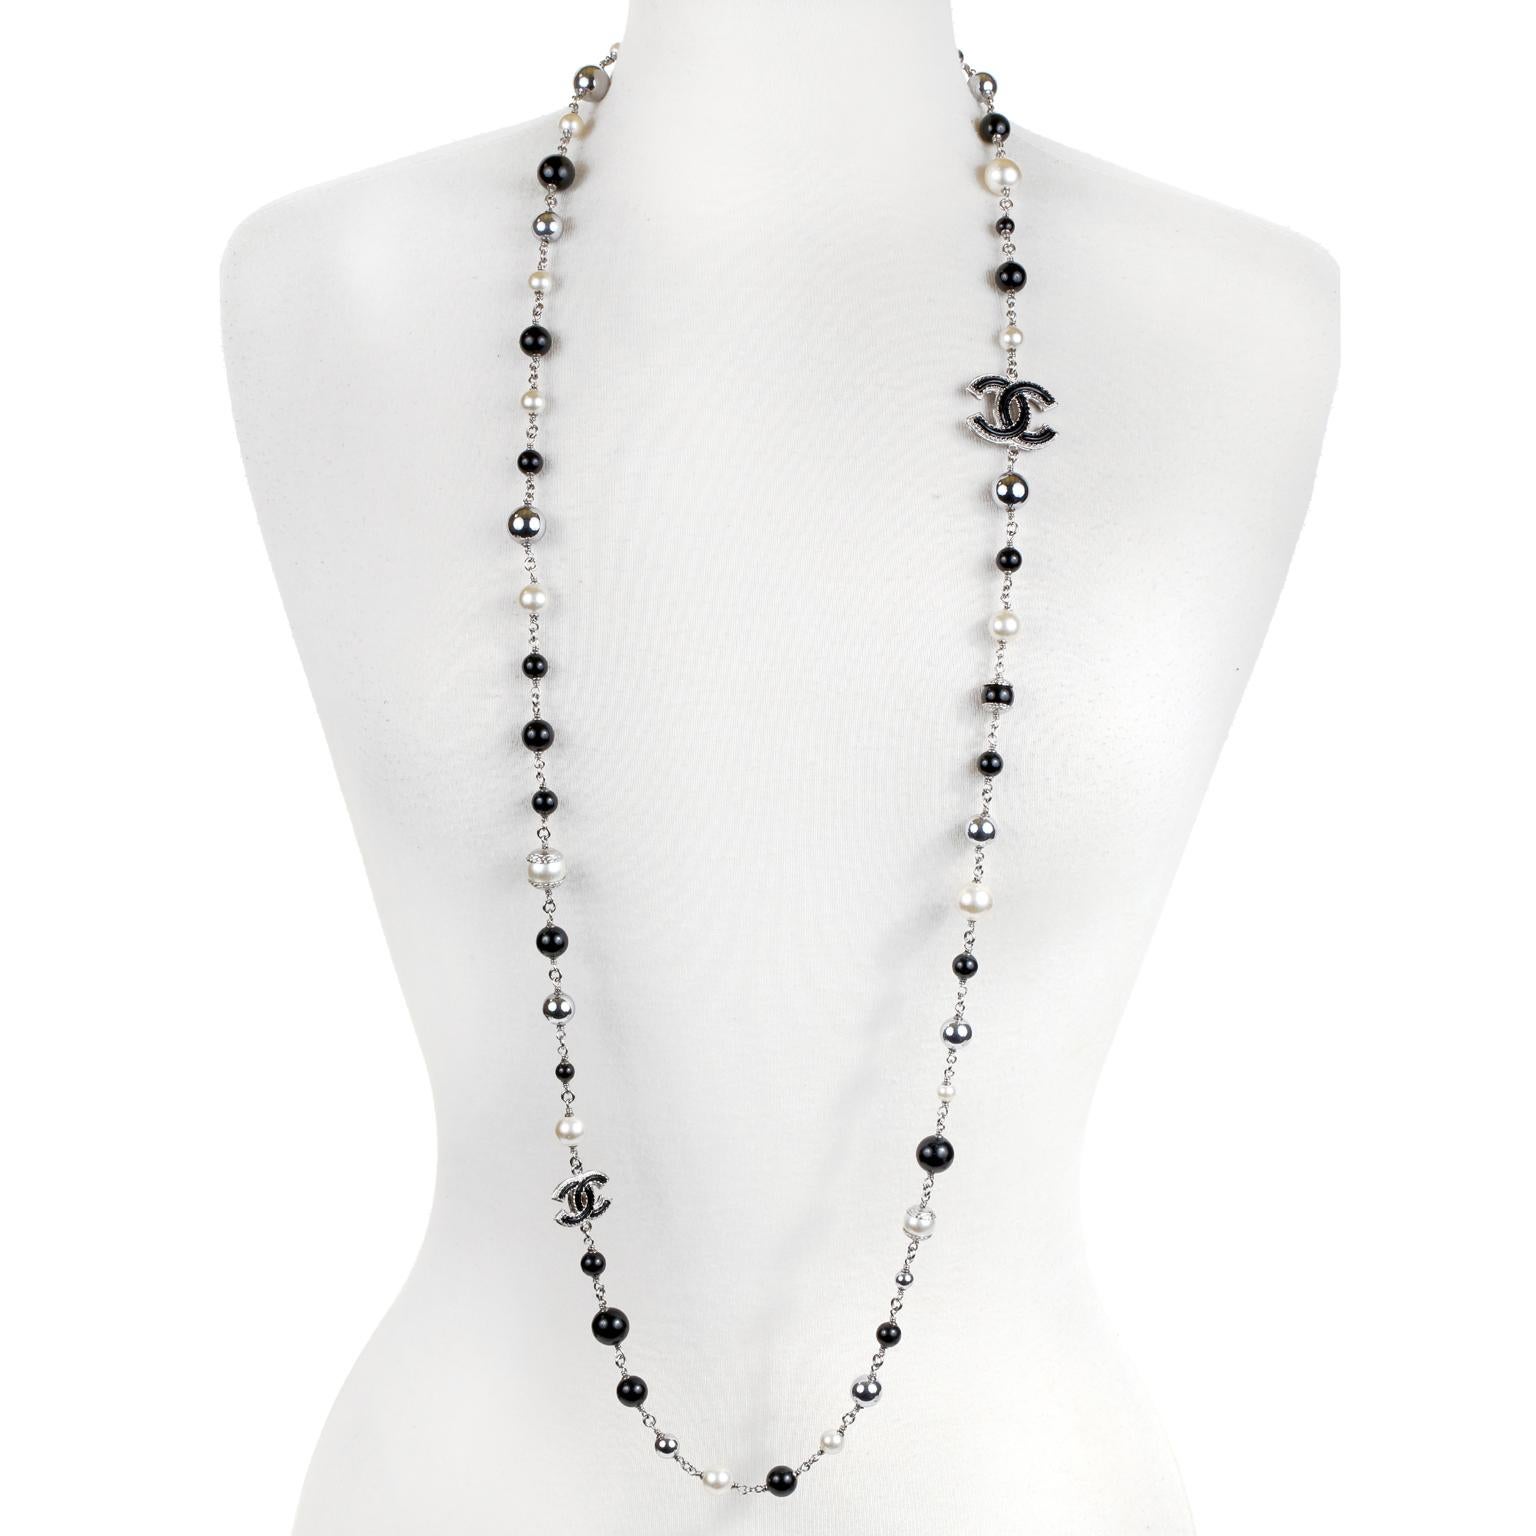 This authentic Chanel Black and White Pearl and Enamel Long Necklace is in excellent condition.  Timeless and versatile, this elegant chain of pearls can be worn with everything from evening wear to T shirts.
Faux pearls, black enamel, and silver